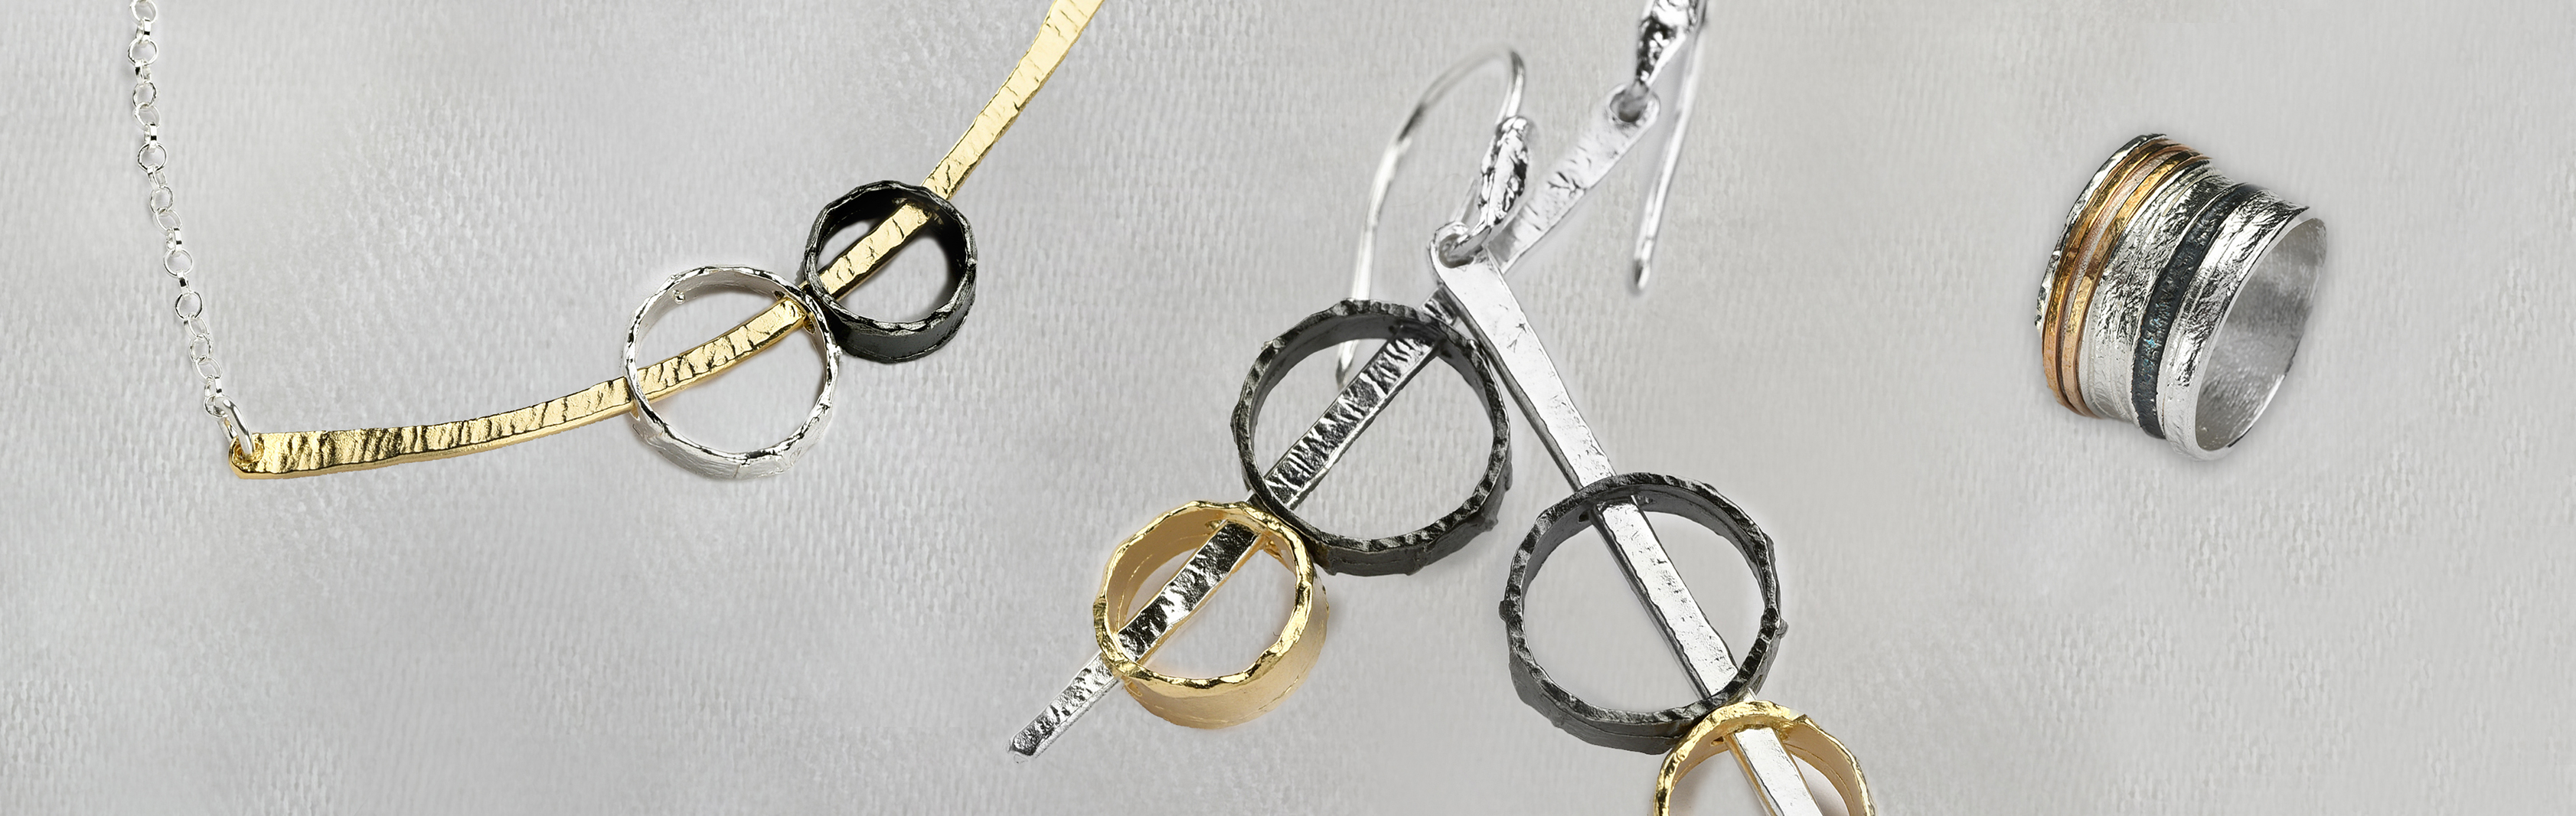 Round vs. Straight Collection | White, Oxidized & Gilded Silver Jewelry